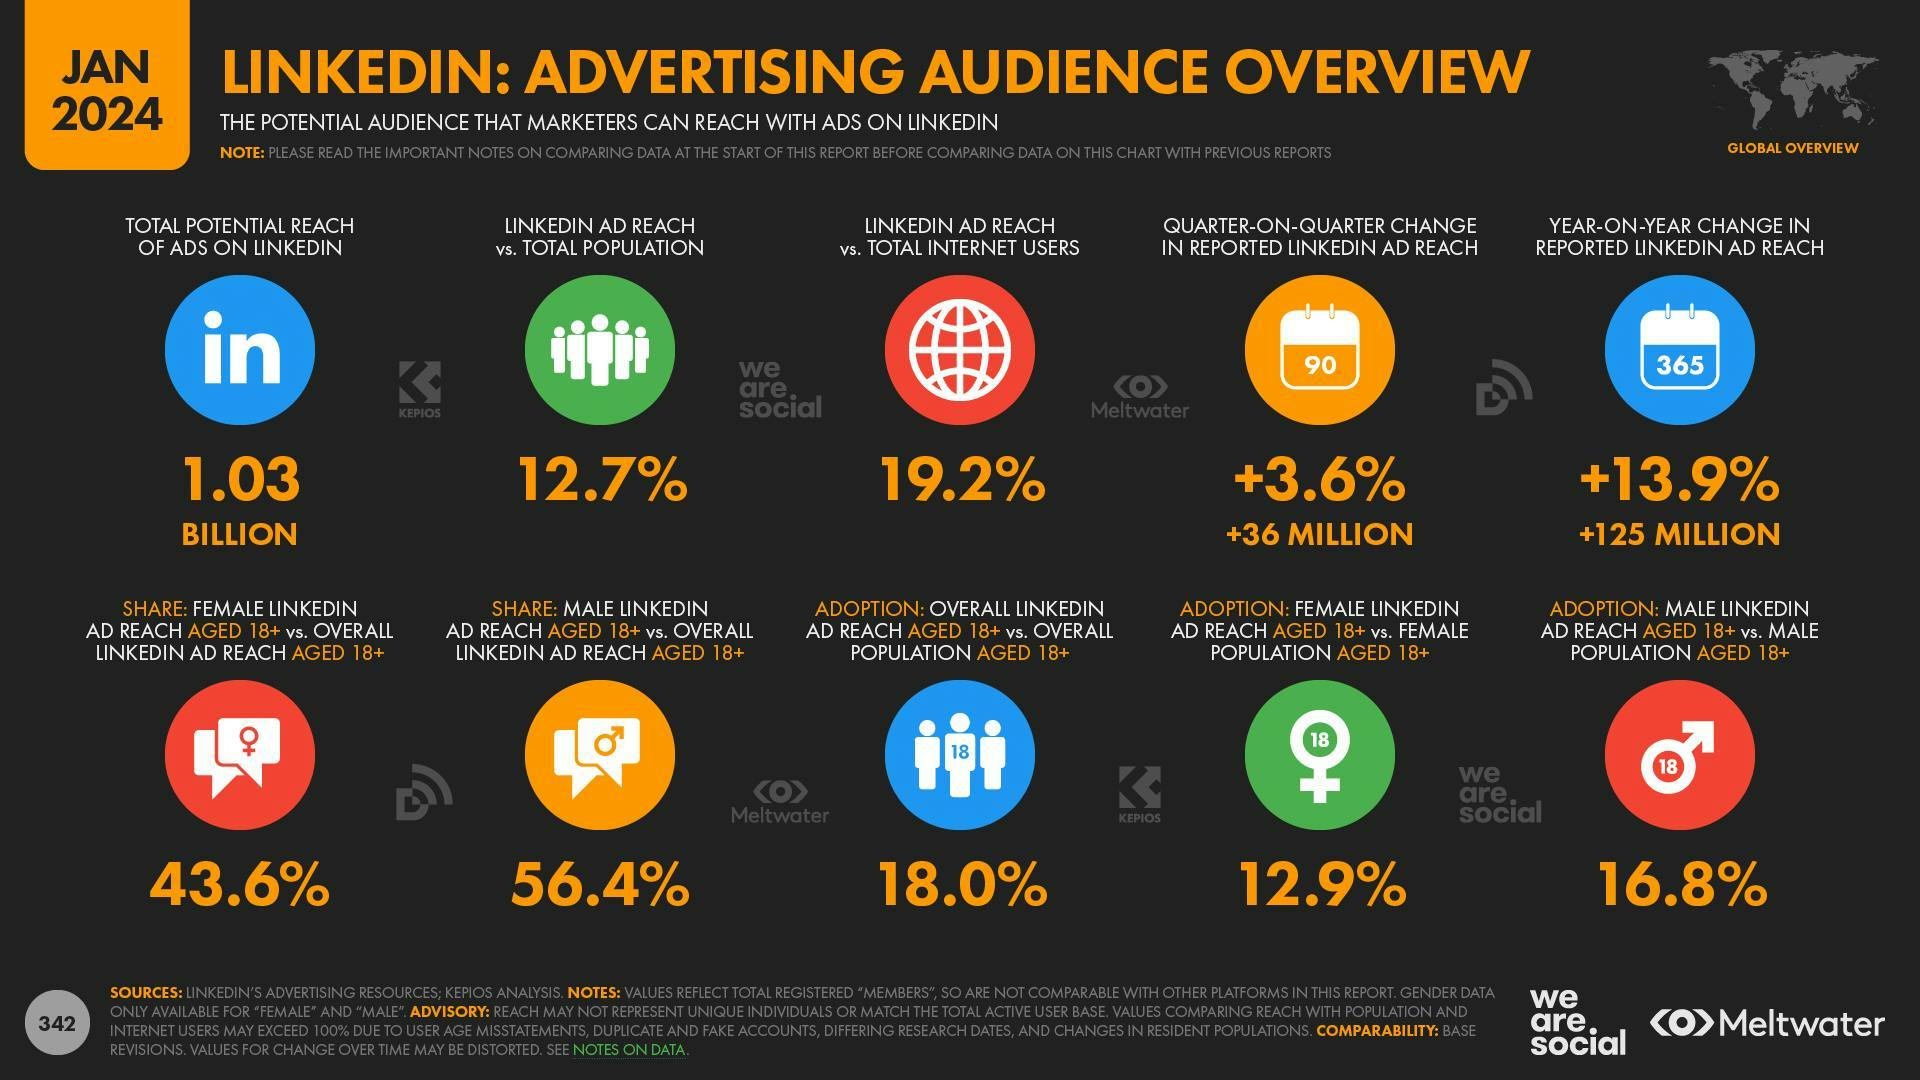 LinkedIn: Advertising audience overview